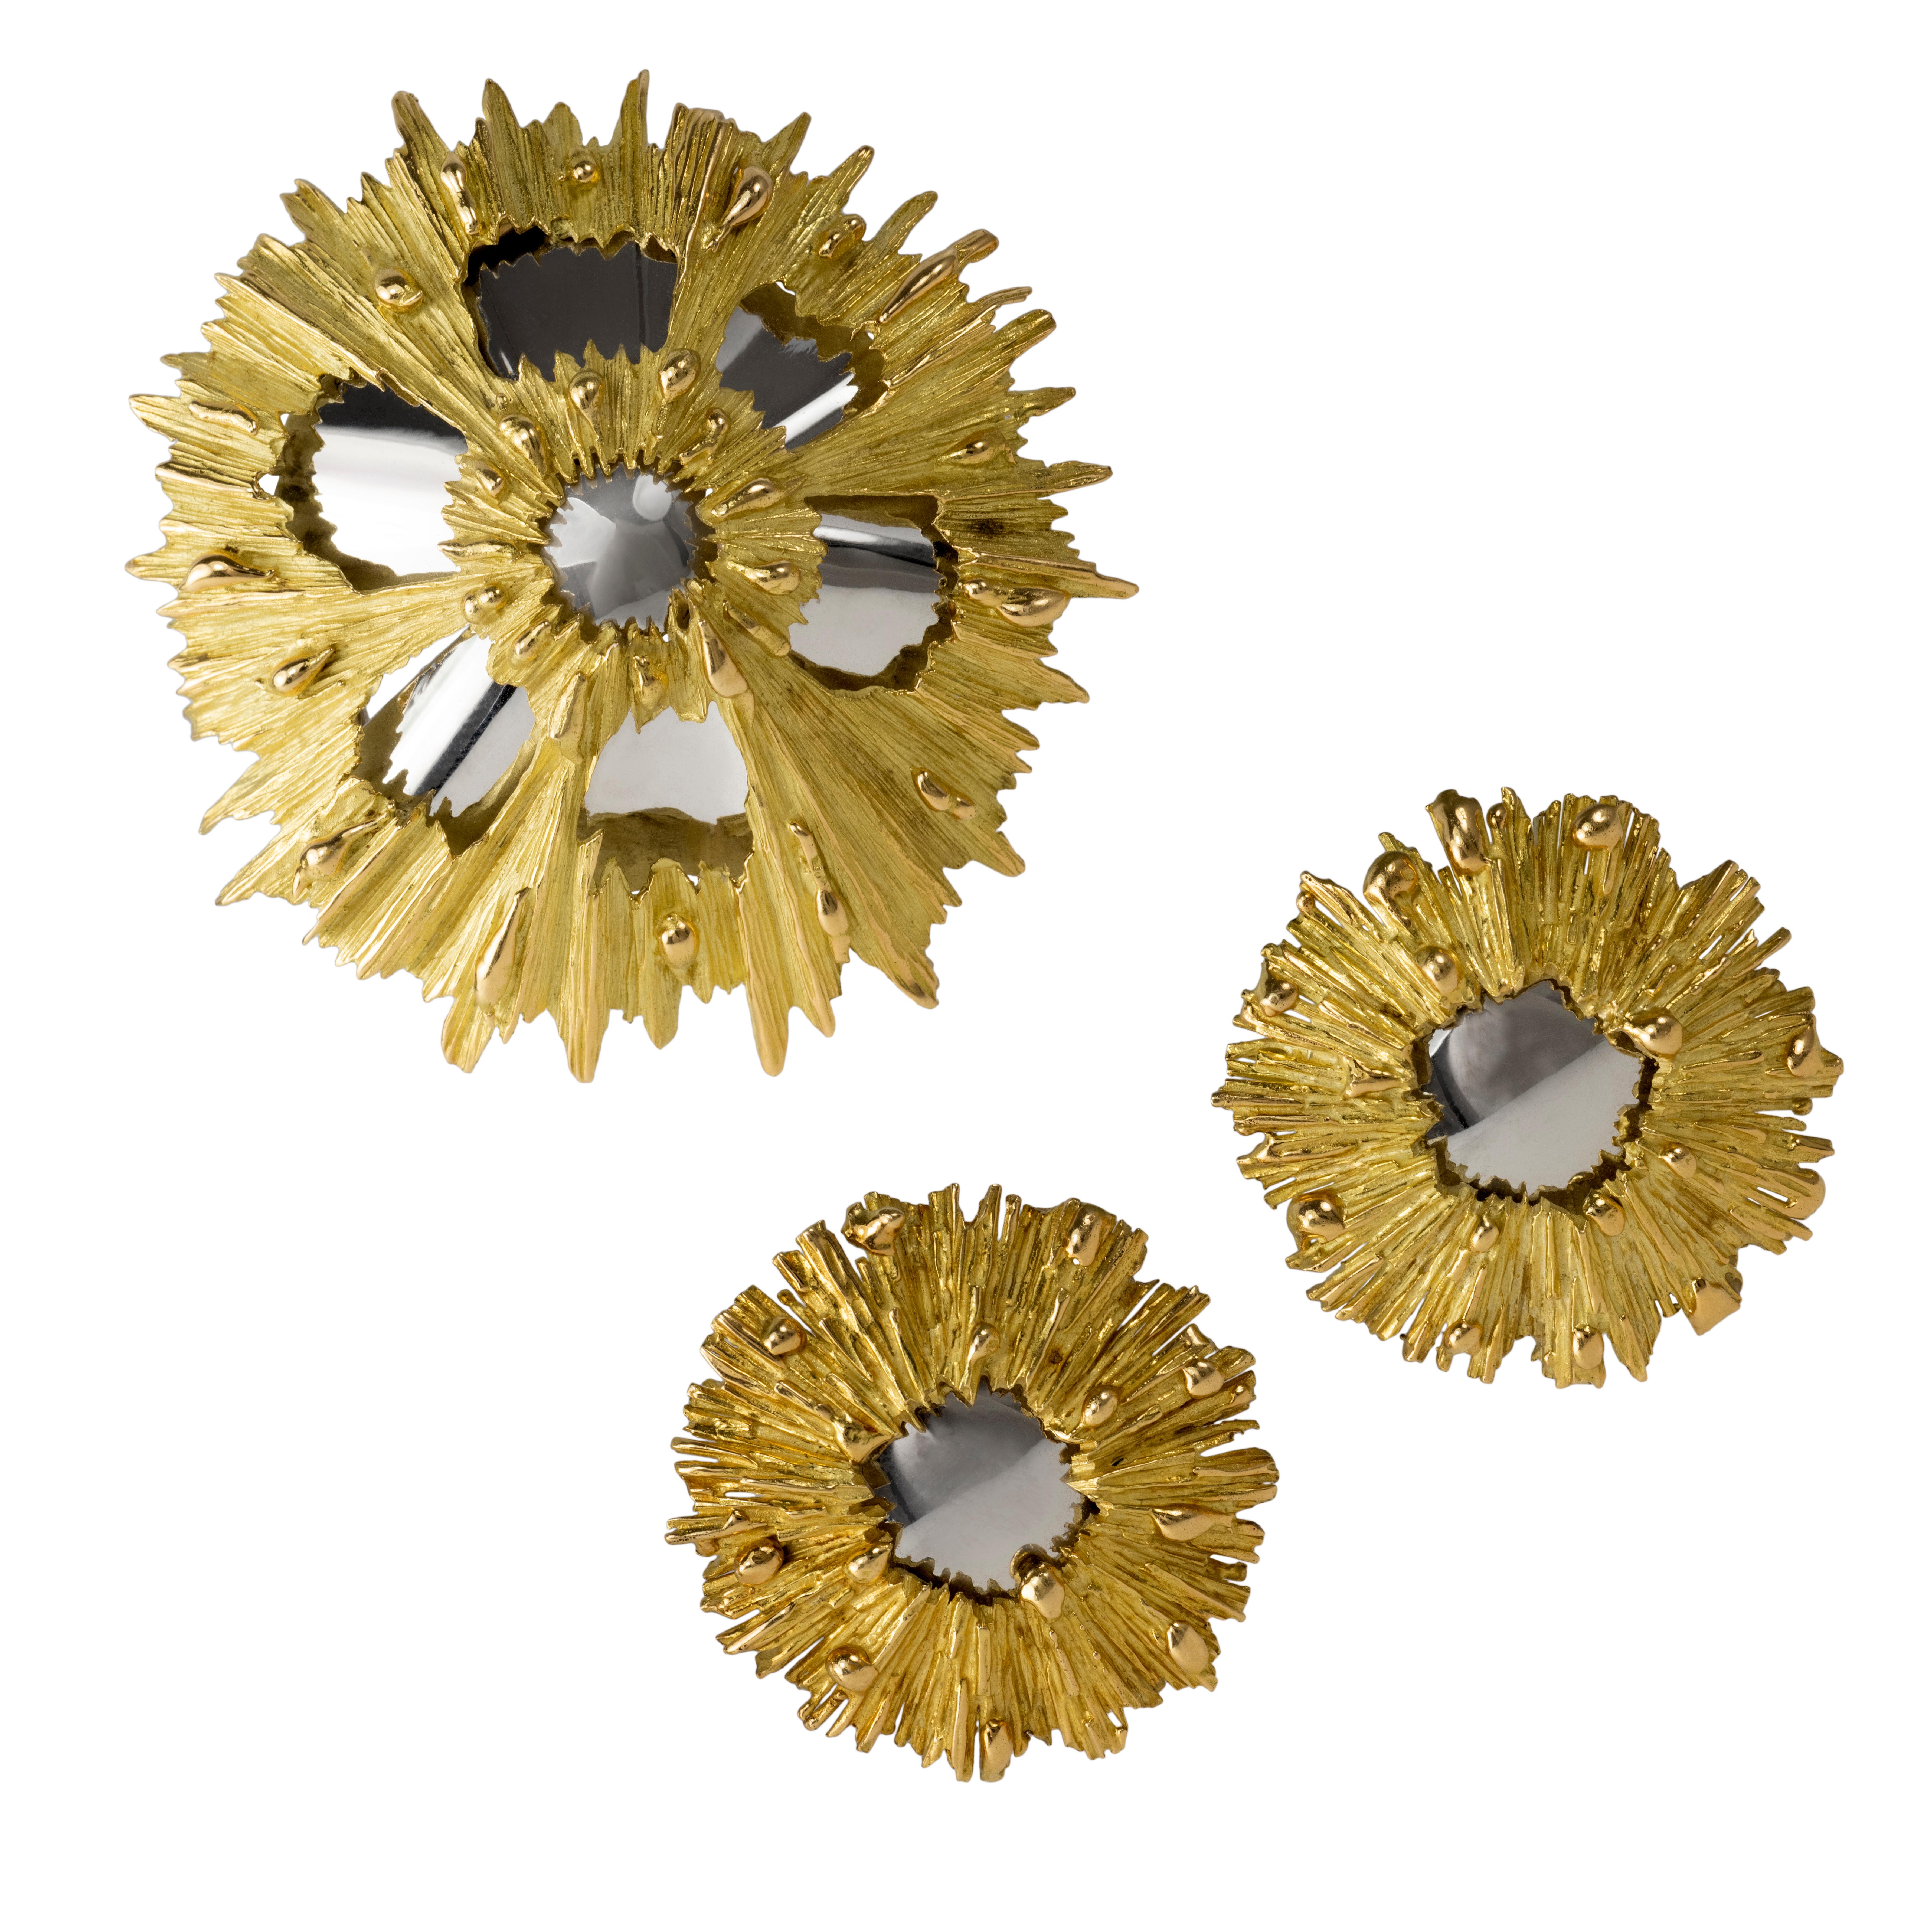 A mirror finish 18 karat white gold and textured 18 karat yellow gold brooch and ear clips set, by Chaumet, 1970s. 

The earrings measure 1.3